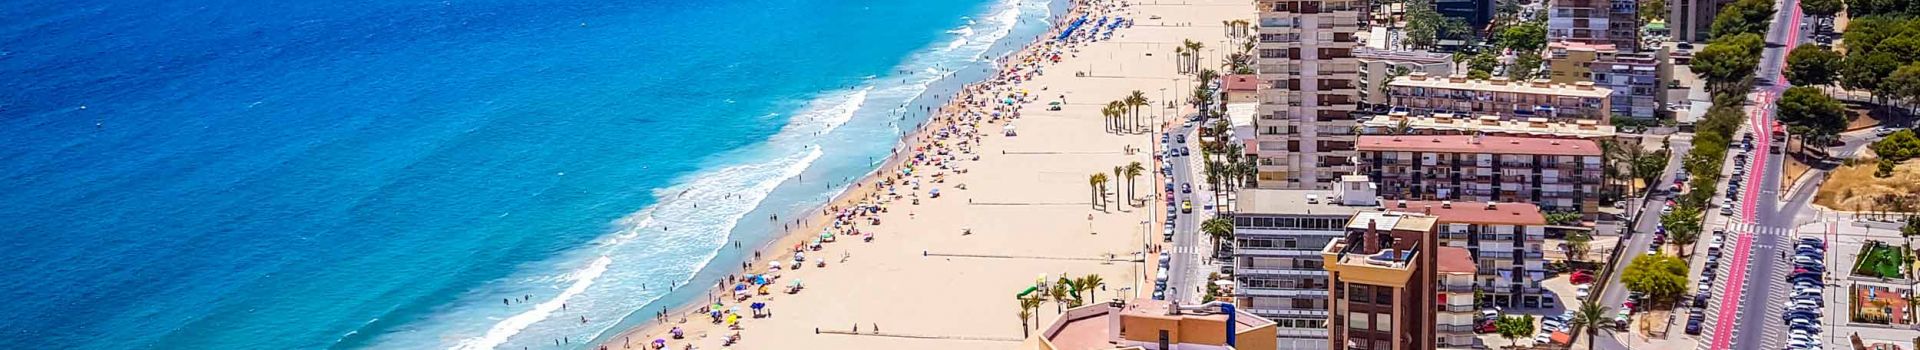 All Inclusive Holidays to Benidorm with Cassidy Travel